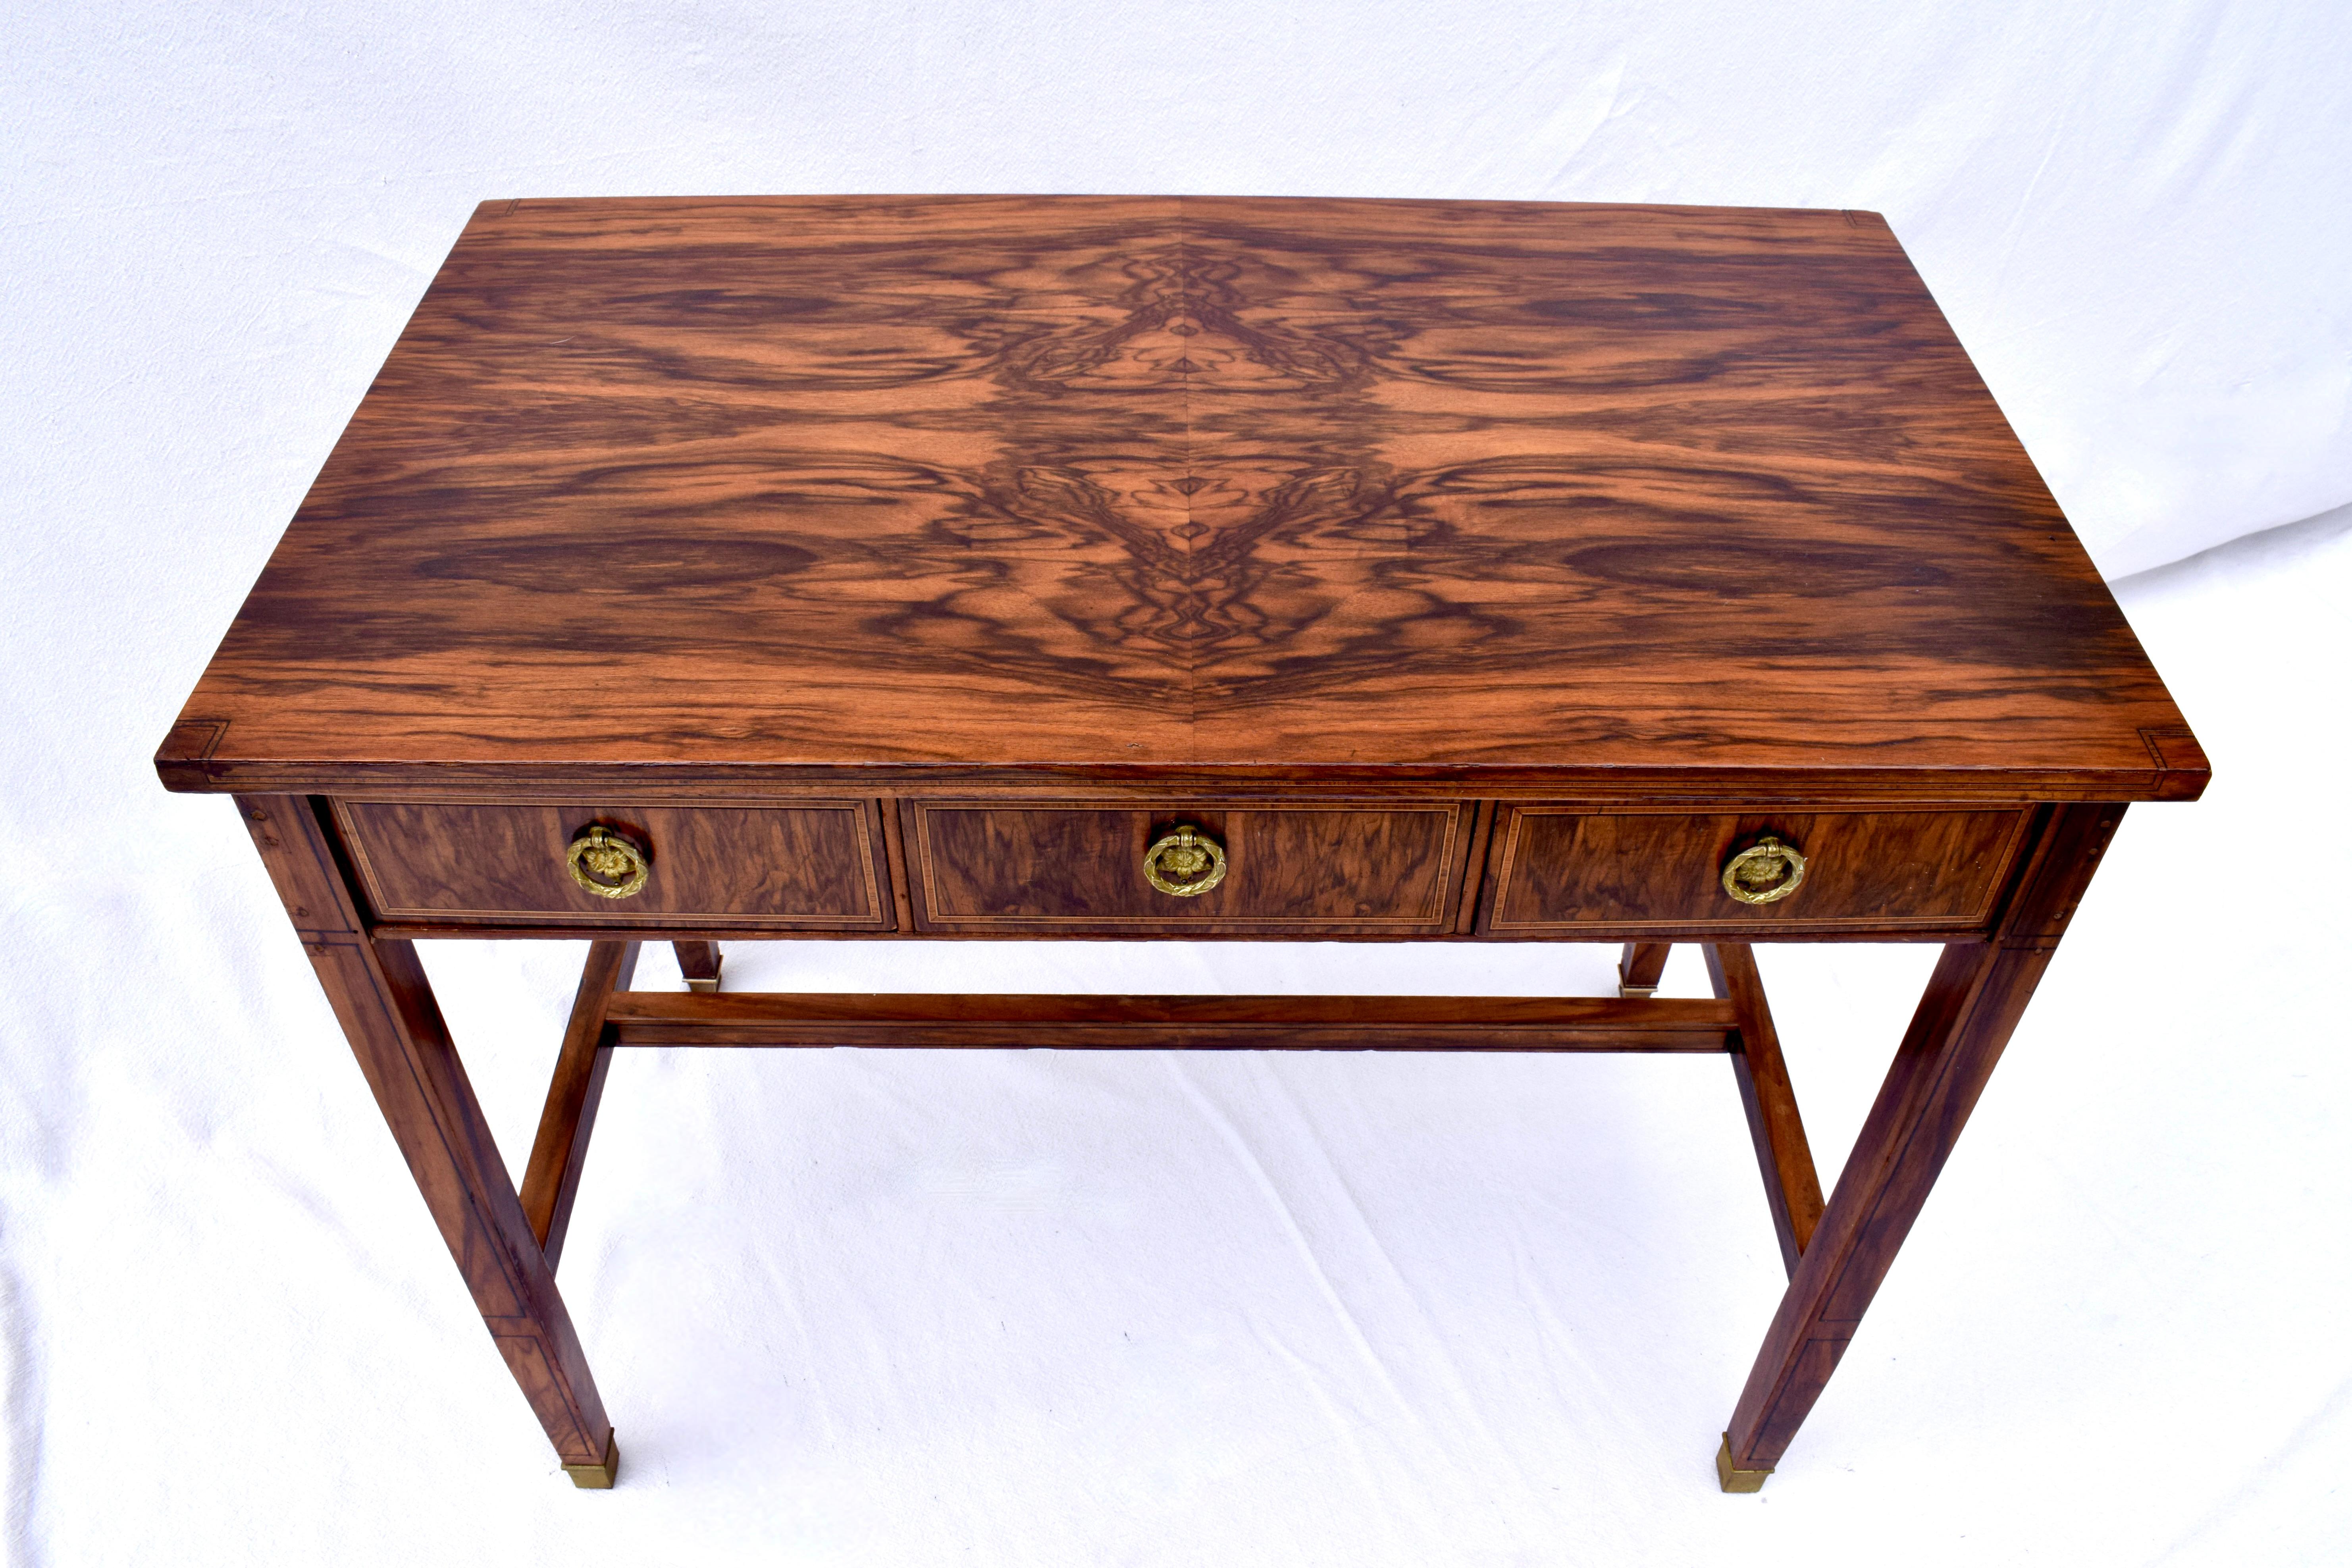 19th c. Rosewood writing desk or work table of impressive book matched fiery grains, original Directoire style brass pulls with inlay details throughout the entire piece. A striking table well suited for purposeful & aesthetically pleasing placement